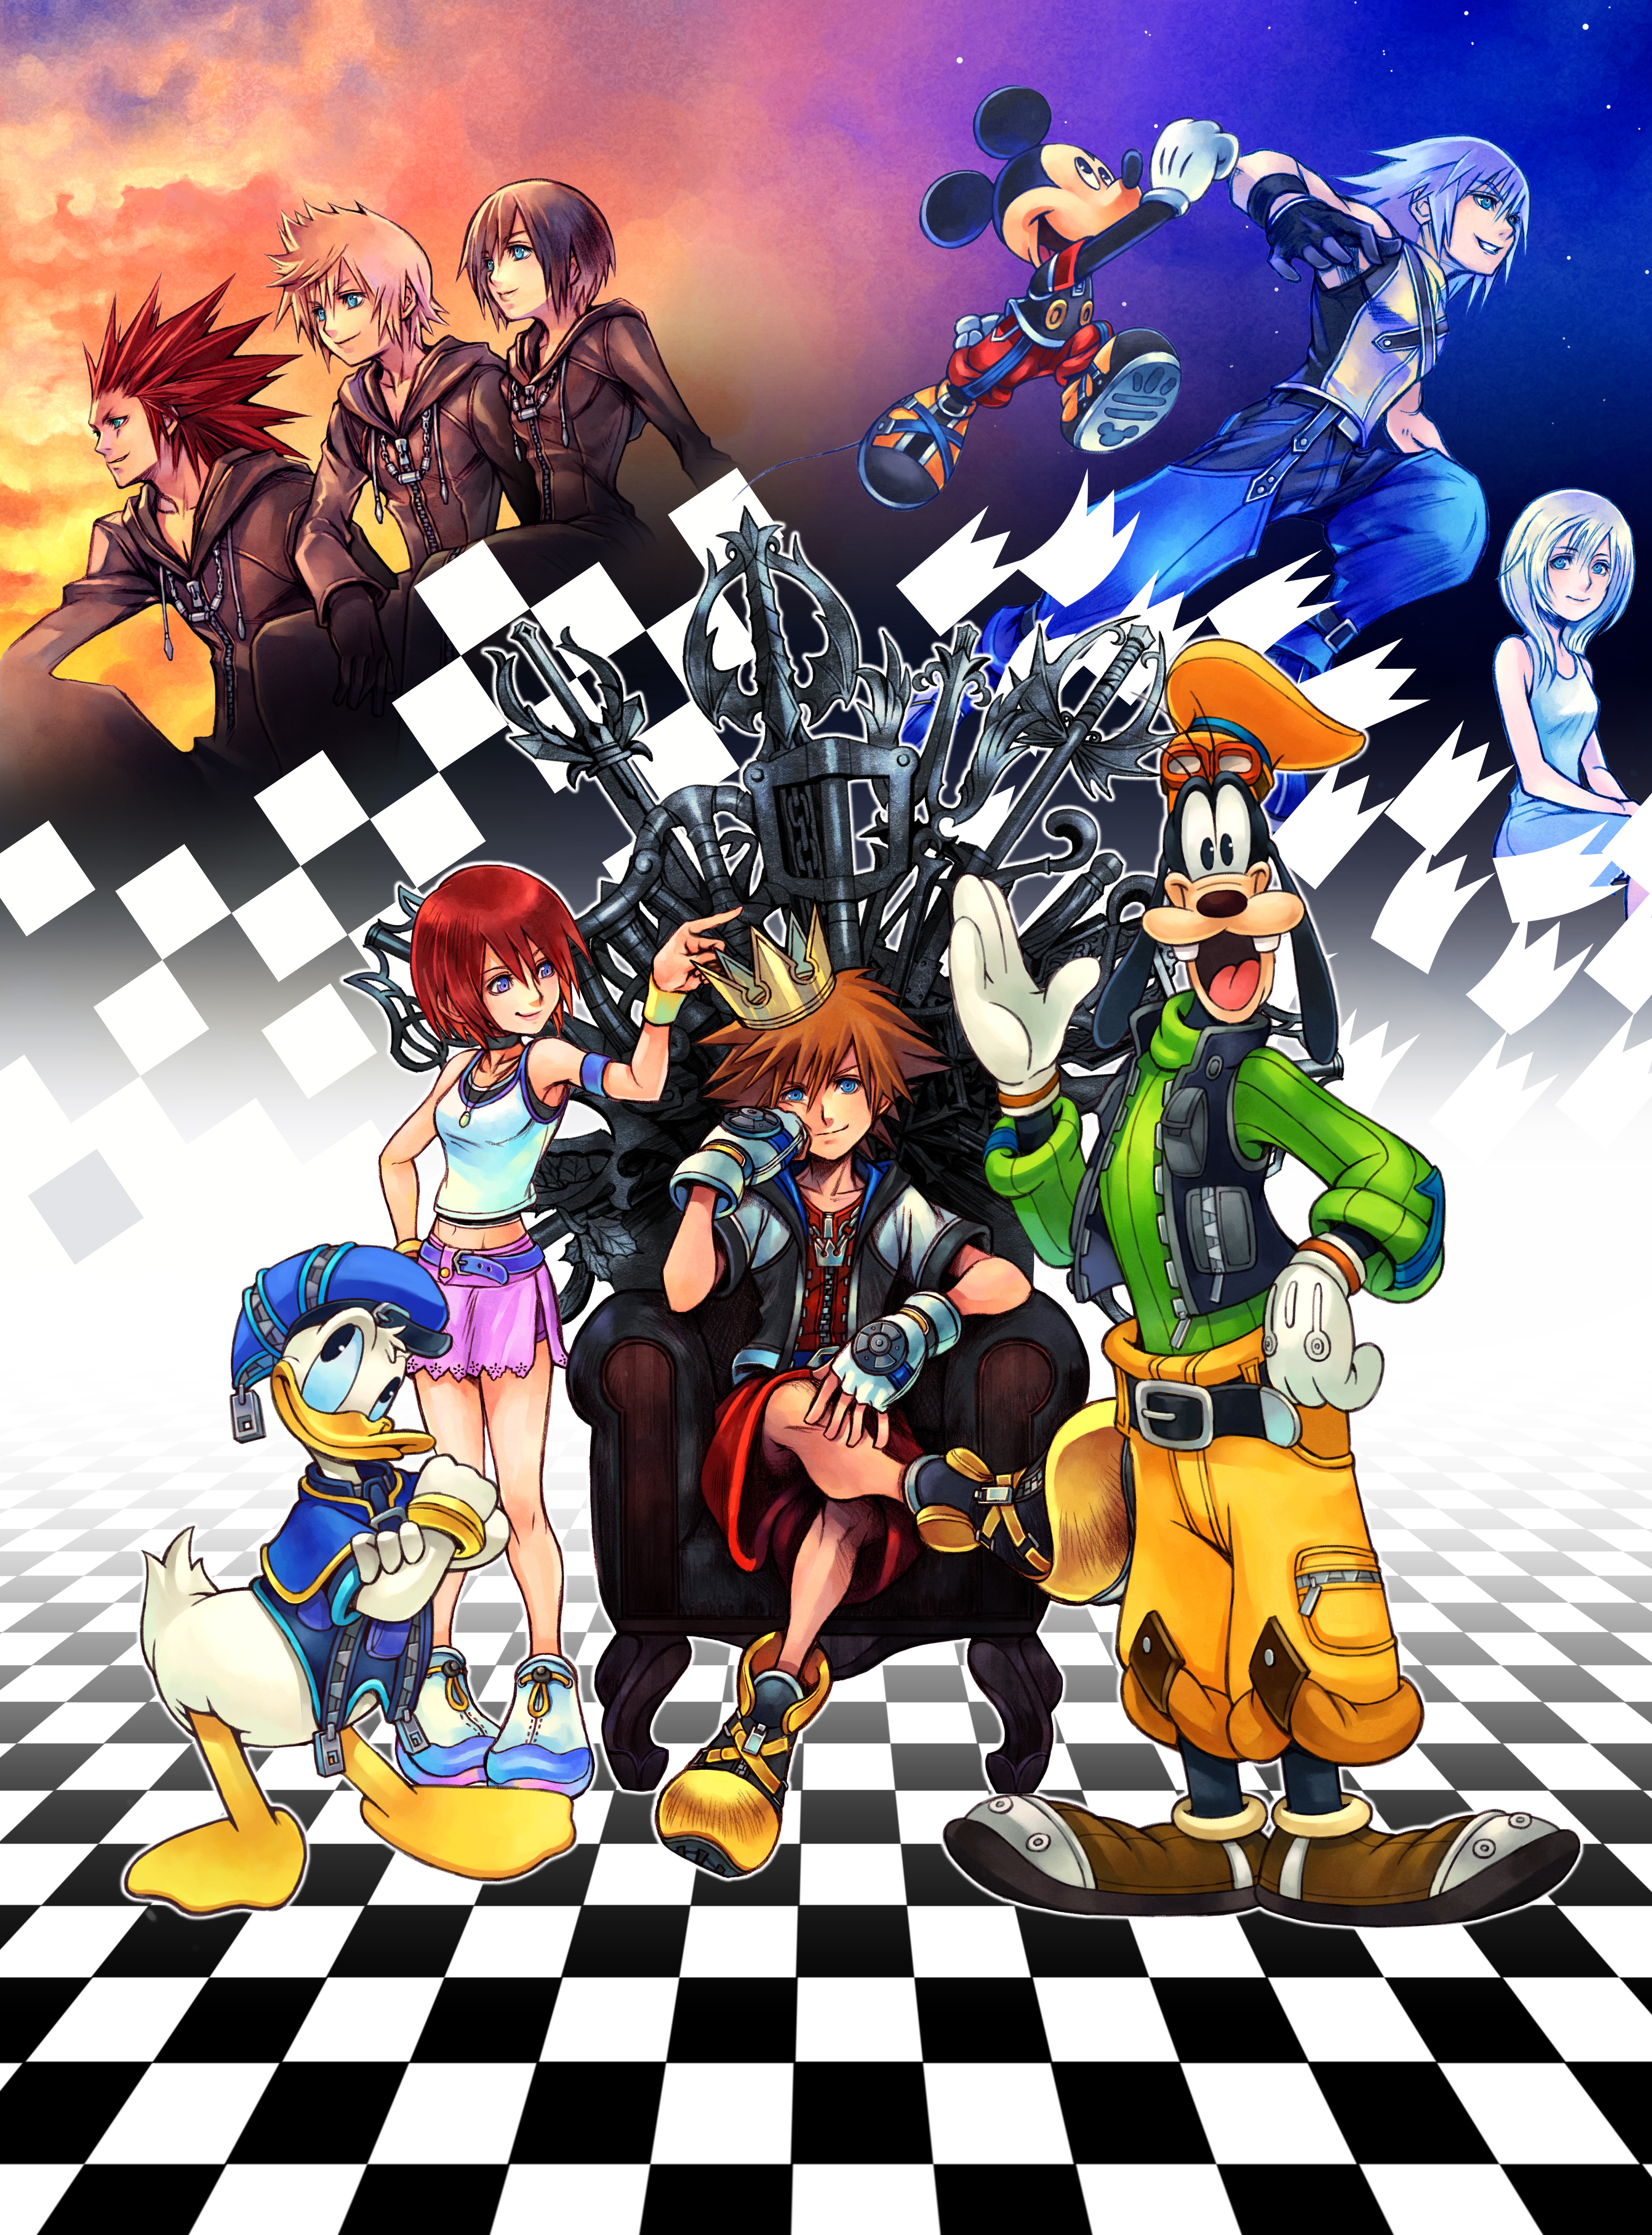 Free Download News Kingdom Hearts 15 Smartphone Wallpaper Ps3 Theme From 7 11 5400x7304 For Your Desktop Mobile Tablet Explore 44 Kingdom Hearts Wallpaper For Ps3 Kingdom Hearts Wallpaper